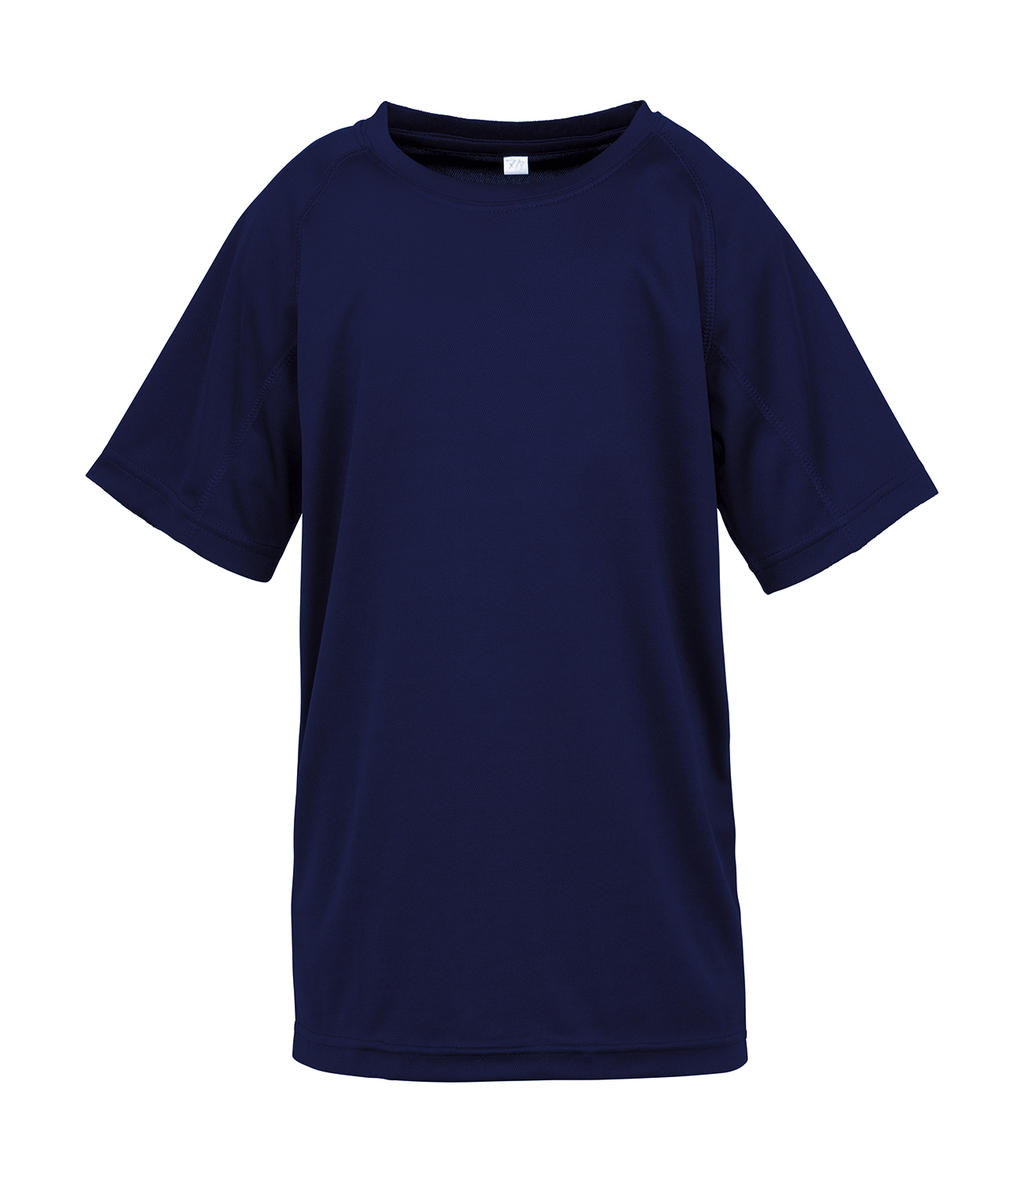  Junior Performance Aircool Tee in Farbe Navy